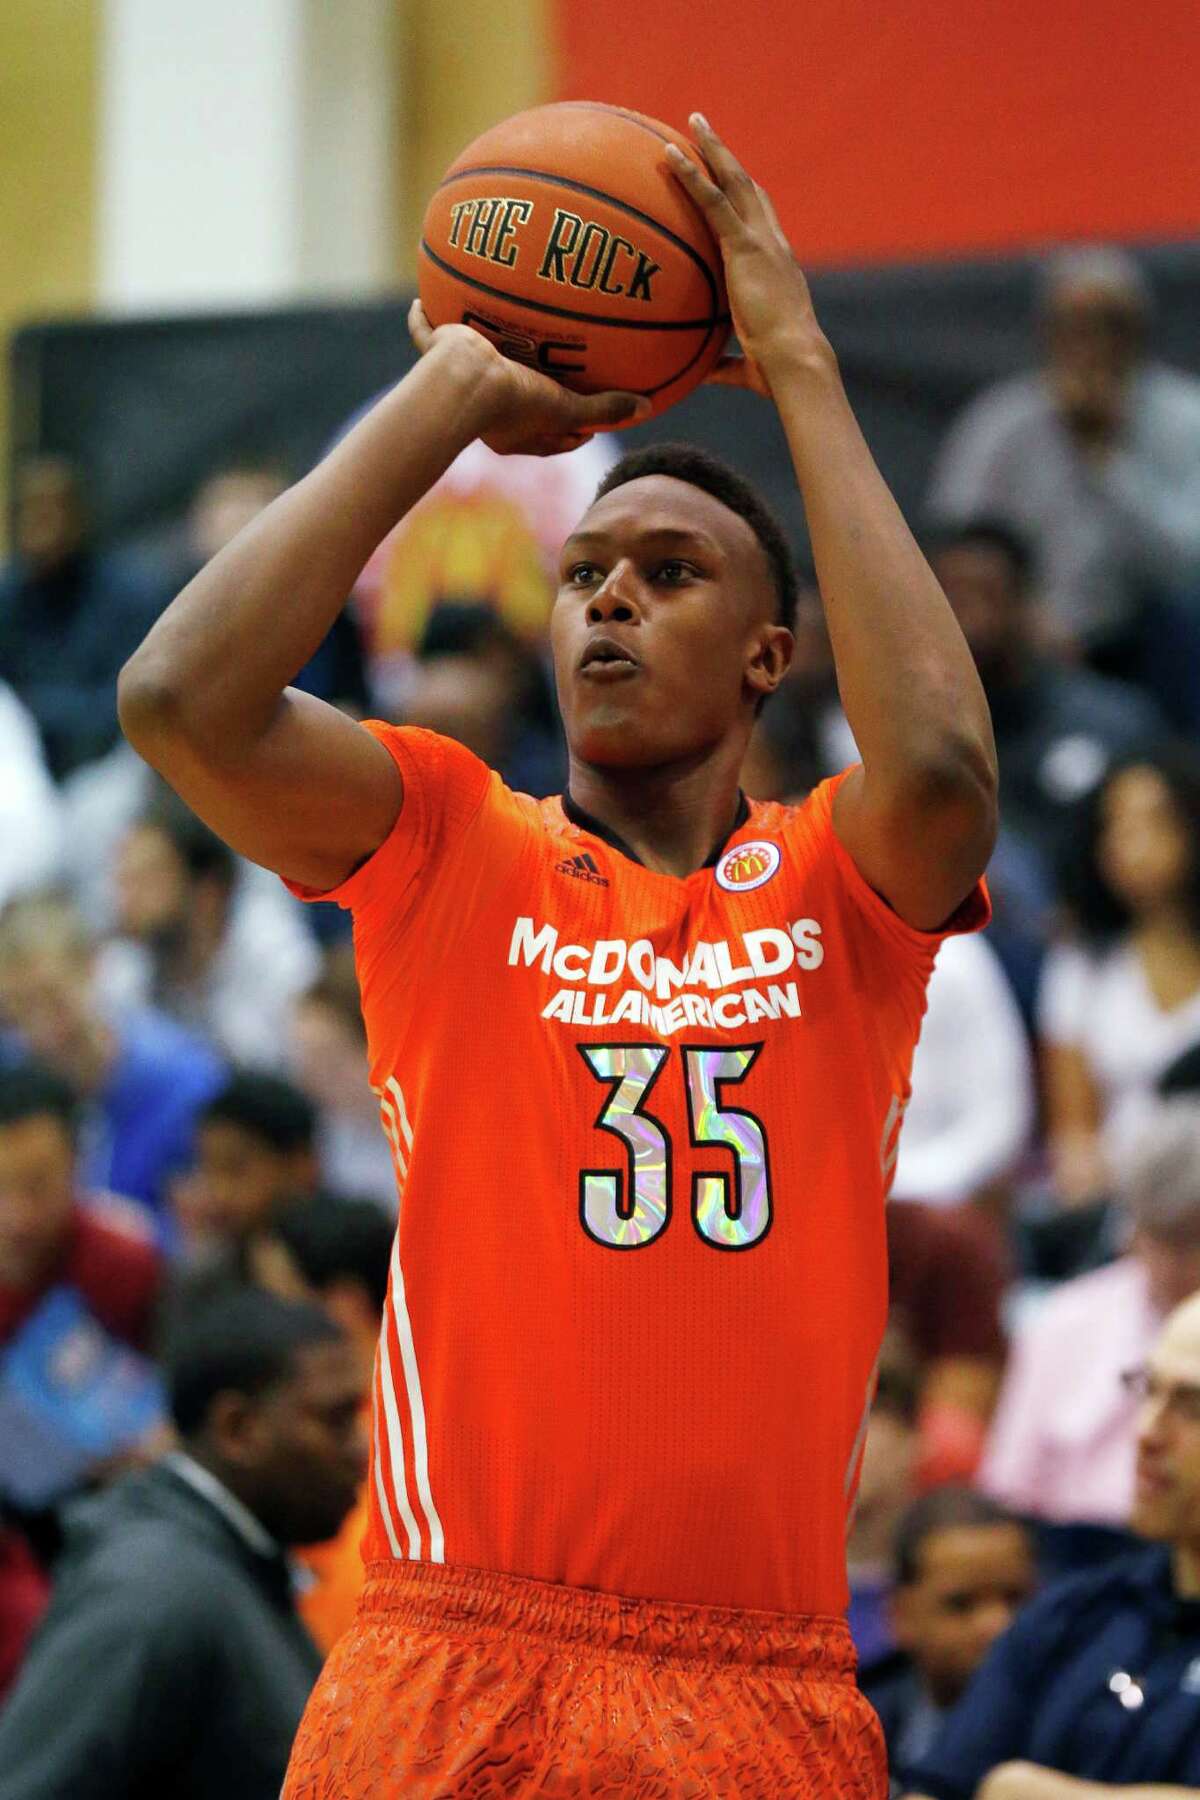 Bedford's Myles Turner, the nation's No. 2 recruit, joins a Texas team that is bringing back four double-figure scorers.